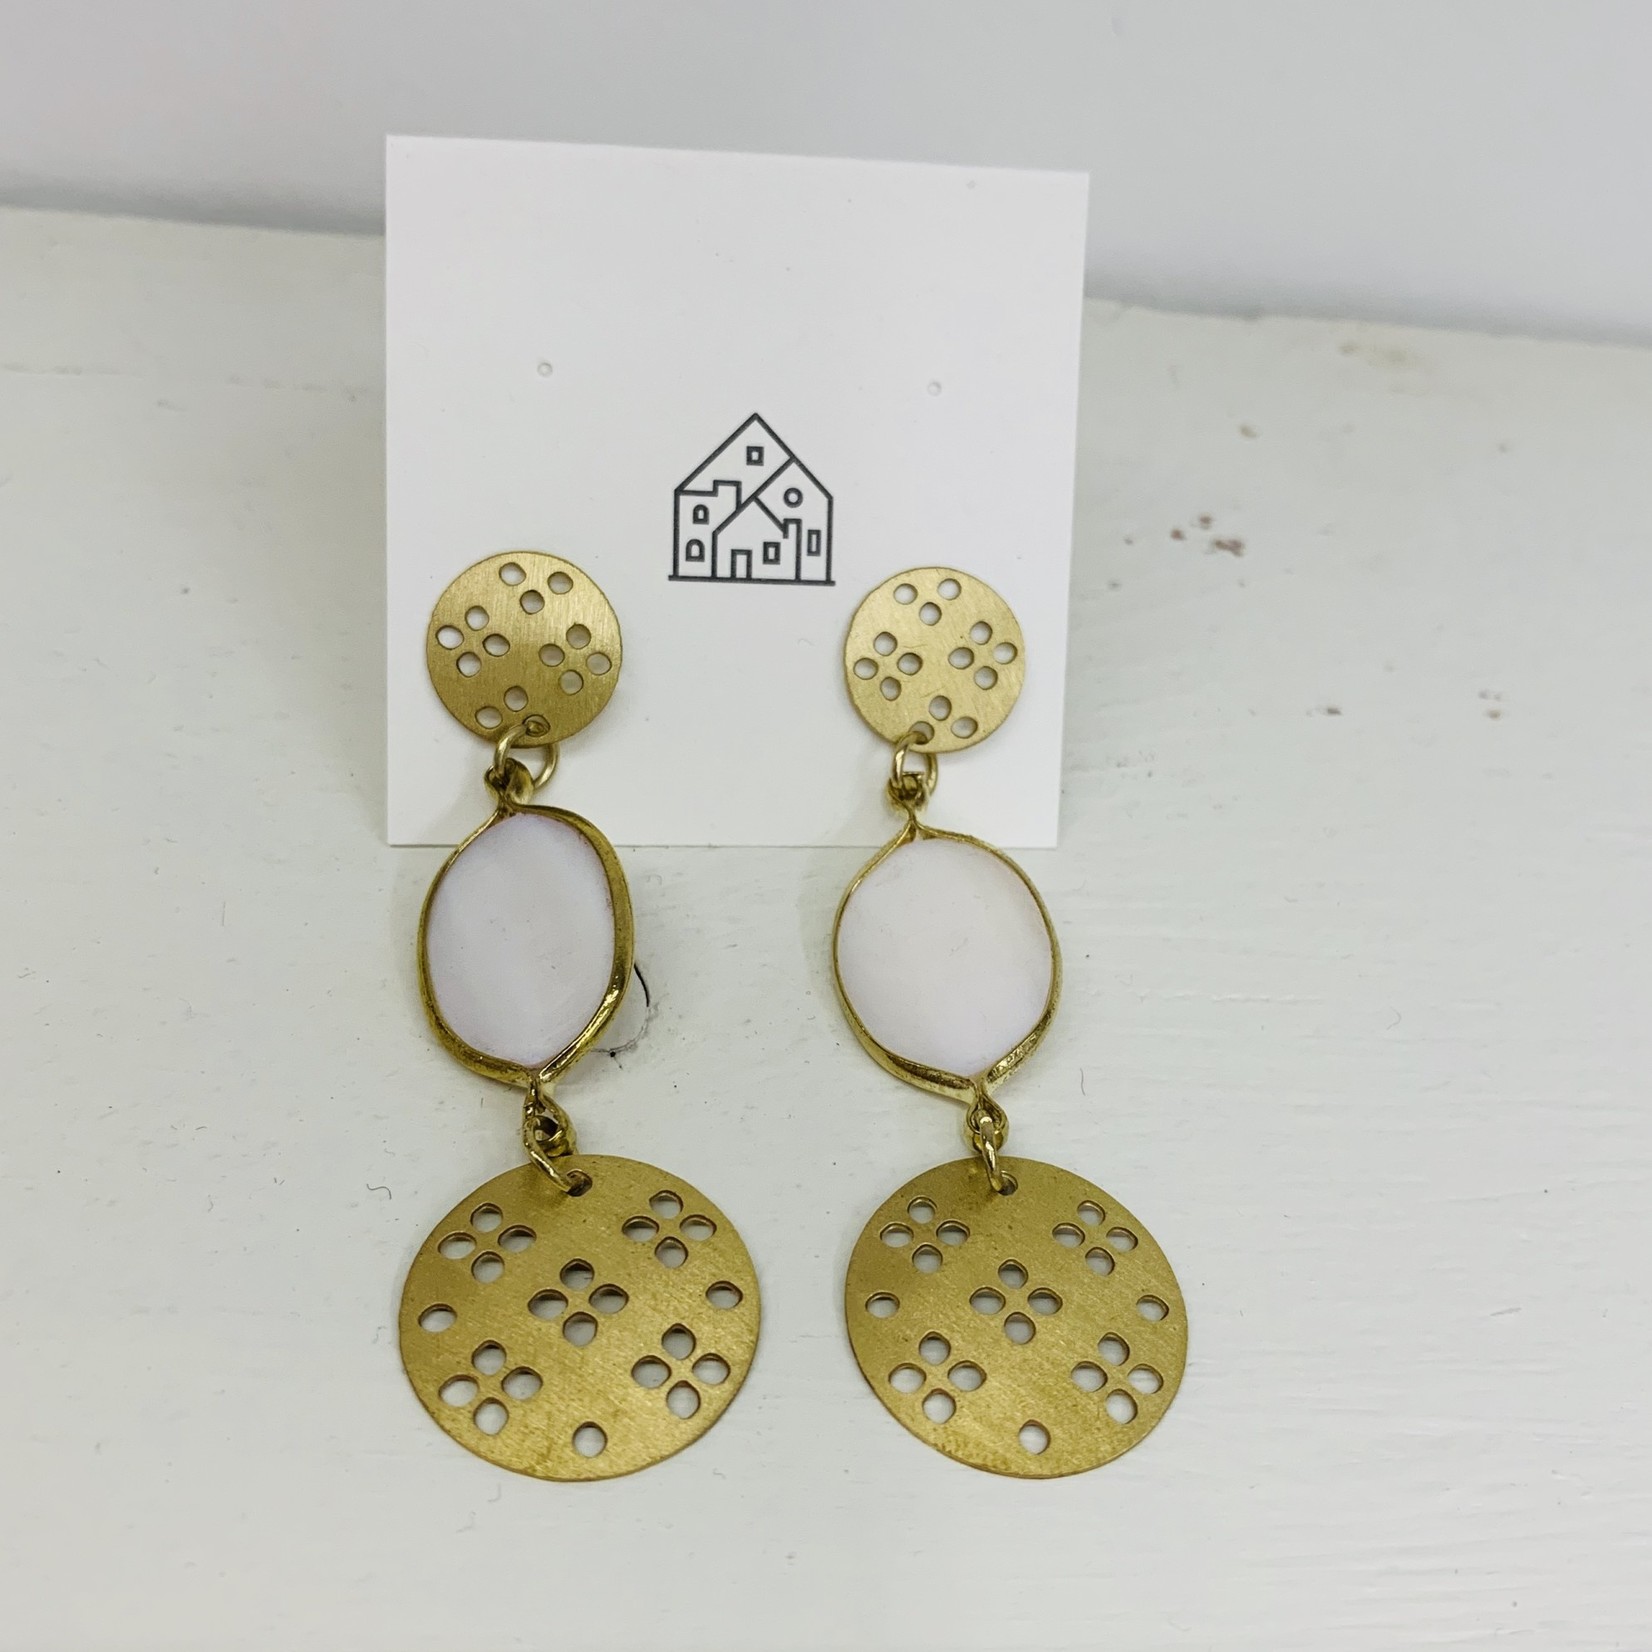 Global Crafts Dhavala Earrings Gold, India